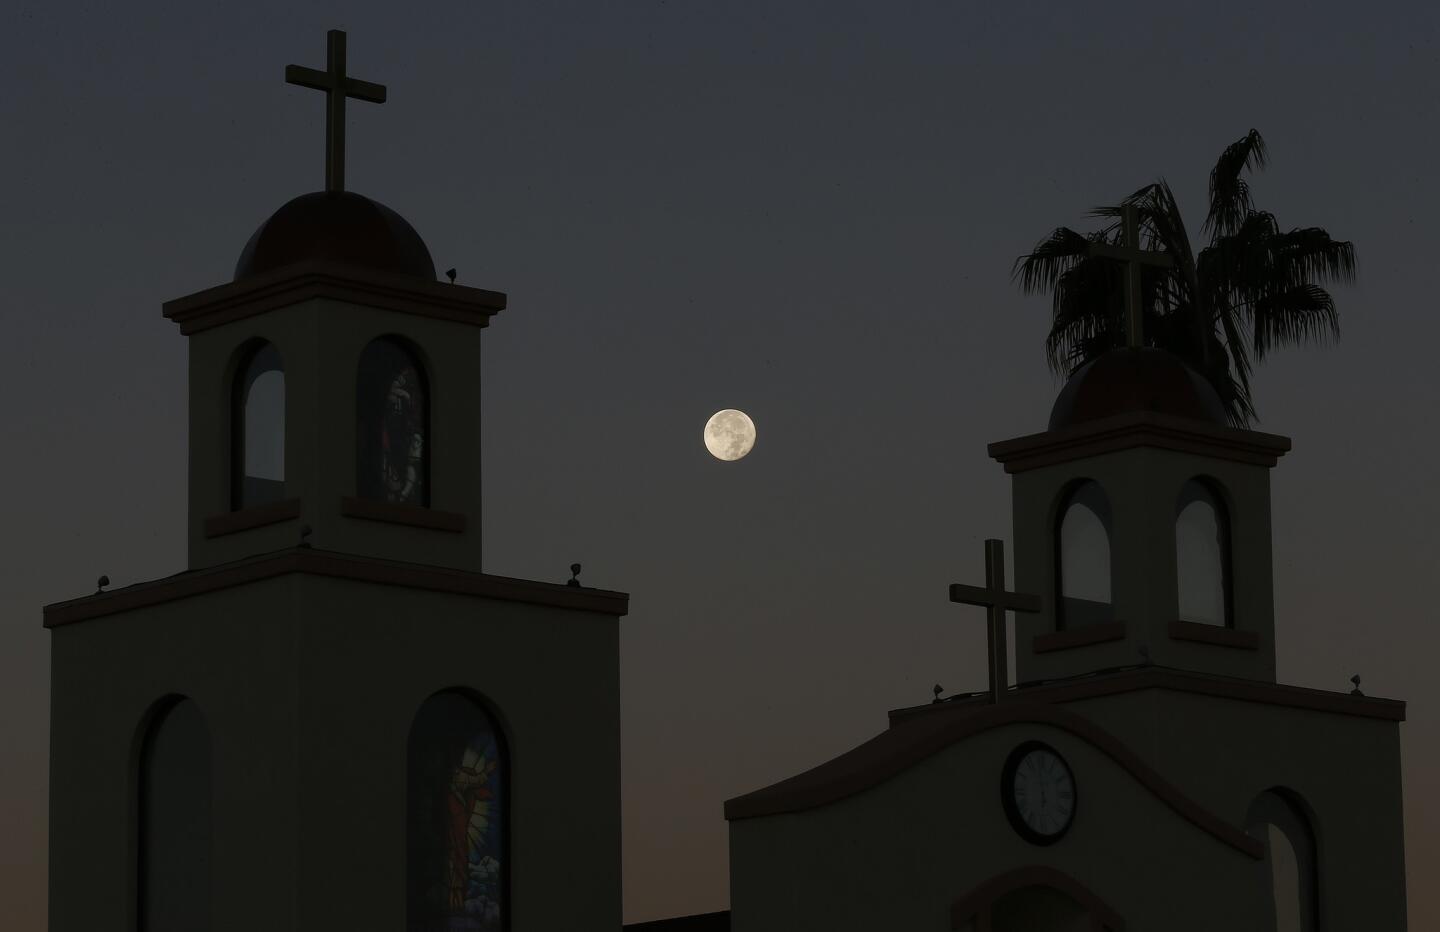 A supermoon descends over the Holy Family Catholic Church spires on Nov. 15, 2016, in Phoenix.